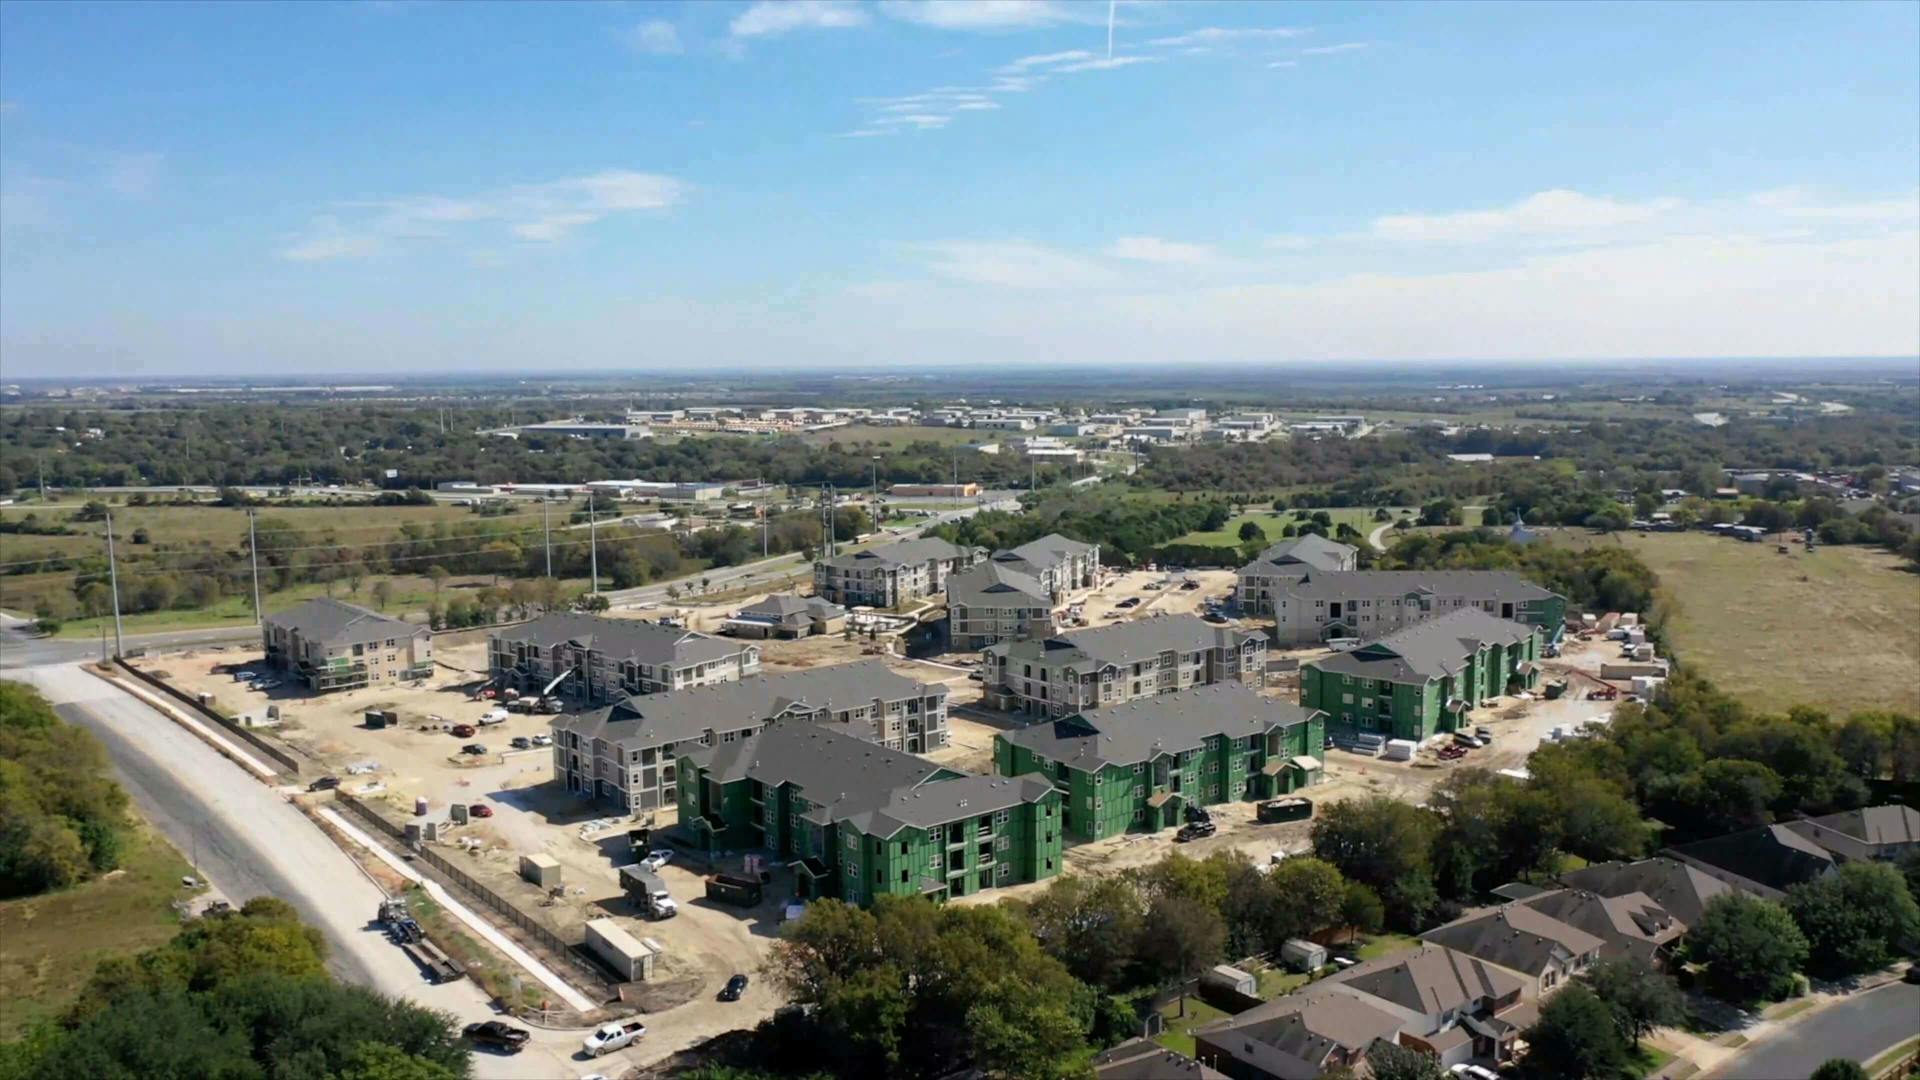 Aerial view of an apartment community